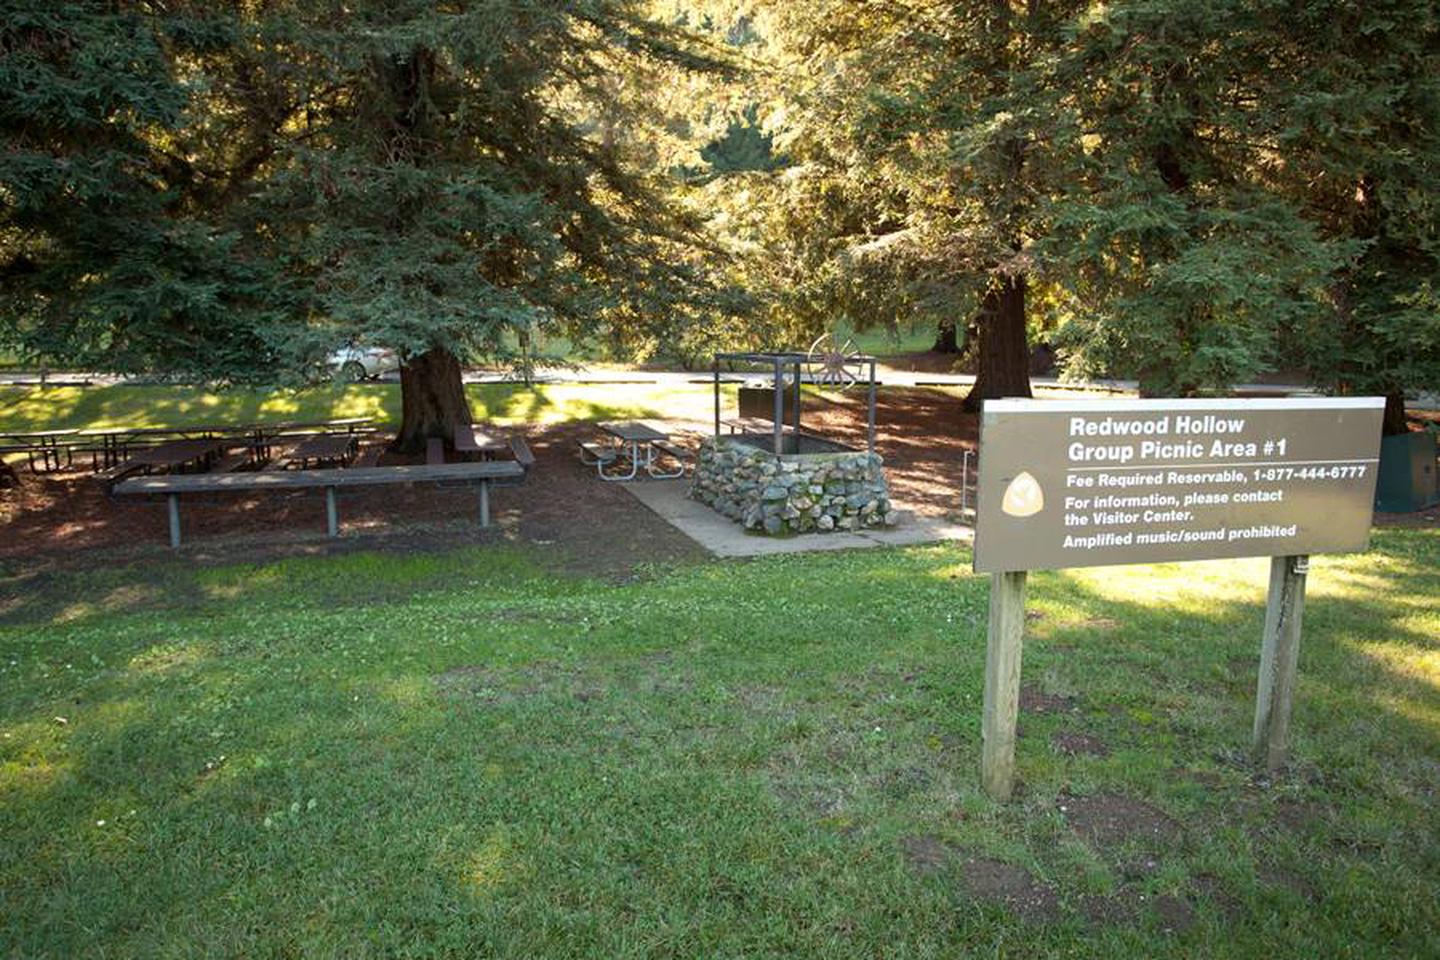 Redwood Hollow Group picnic #1